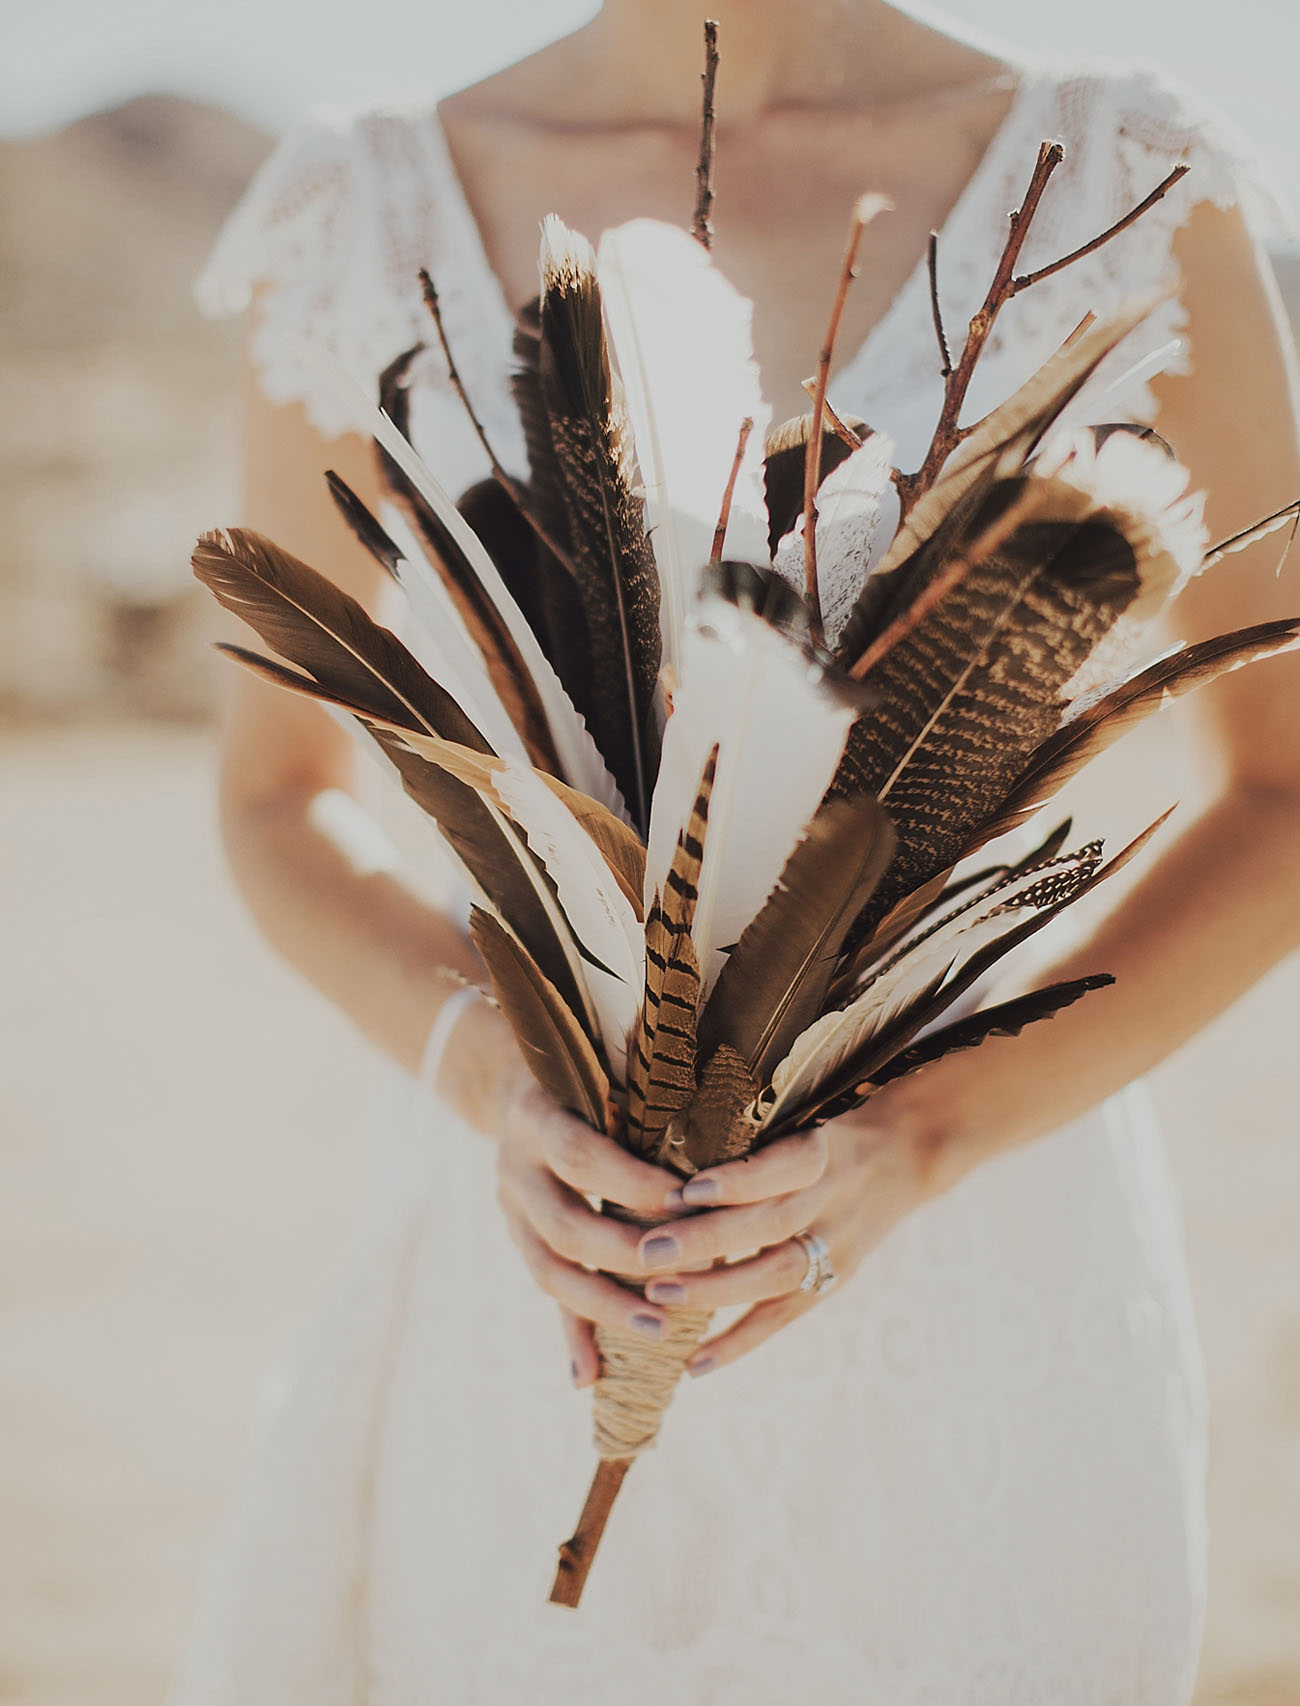 A woman in a white lace wedding dress on a beach holds a bouquet made from white and brown feathers and twigs for her wedding without flowers